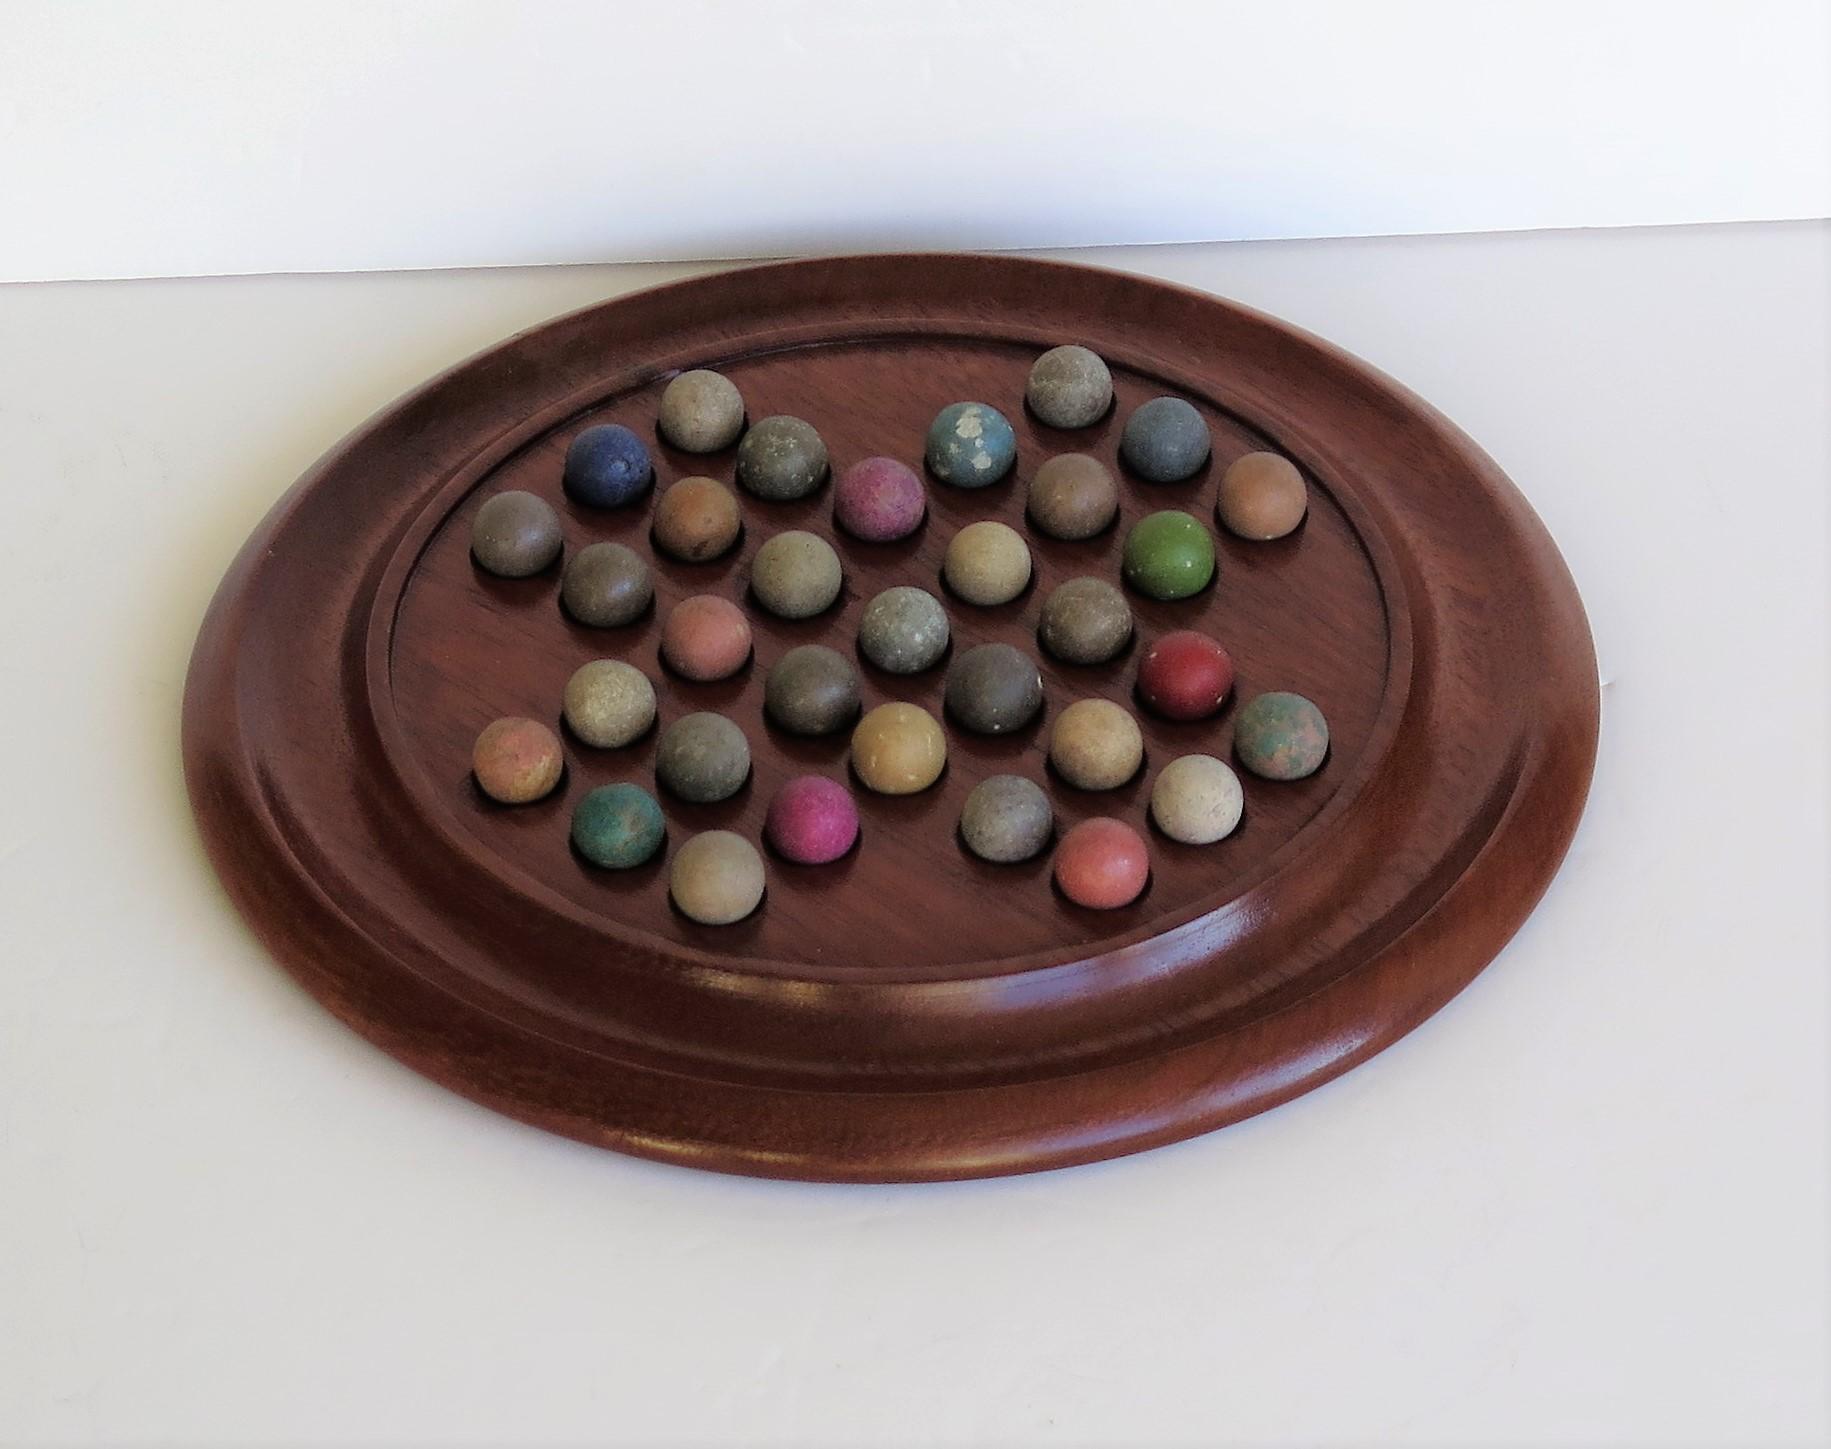 19th Century Victorian Marble Solitaire Game with Walnut Board and 33 Handmade Marbles